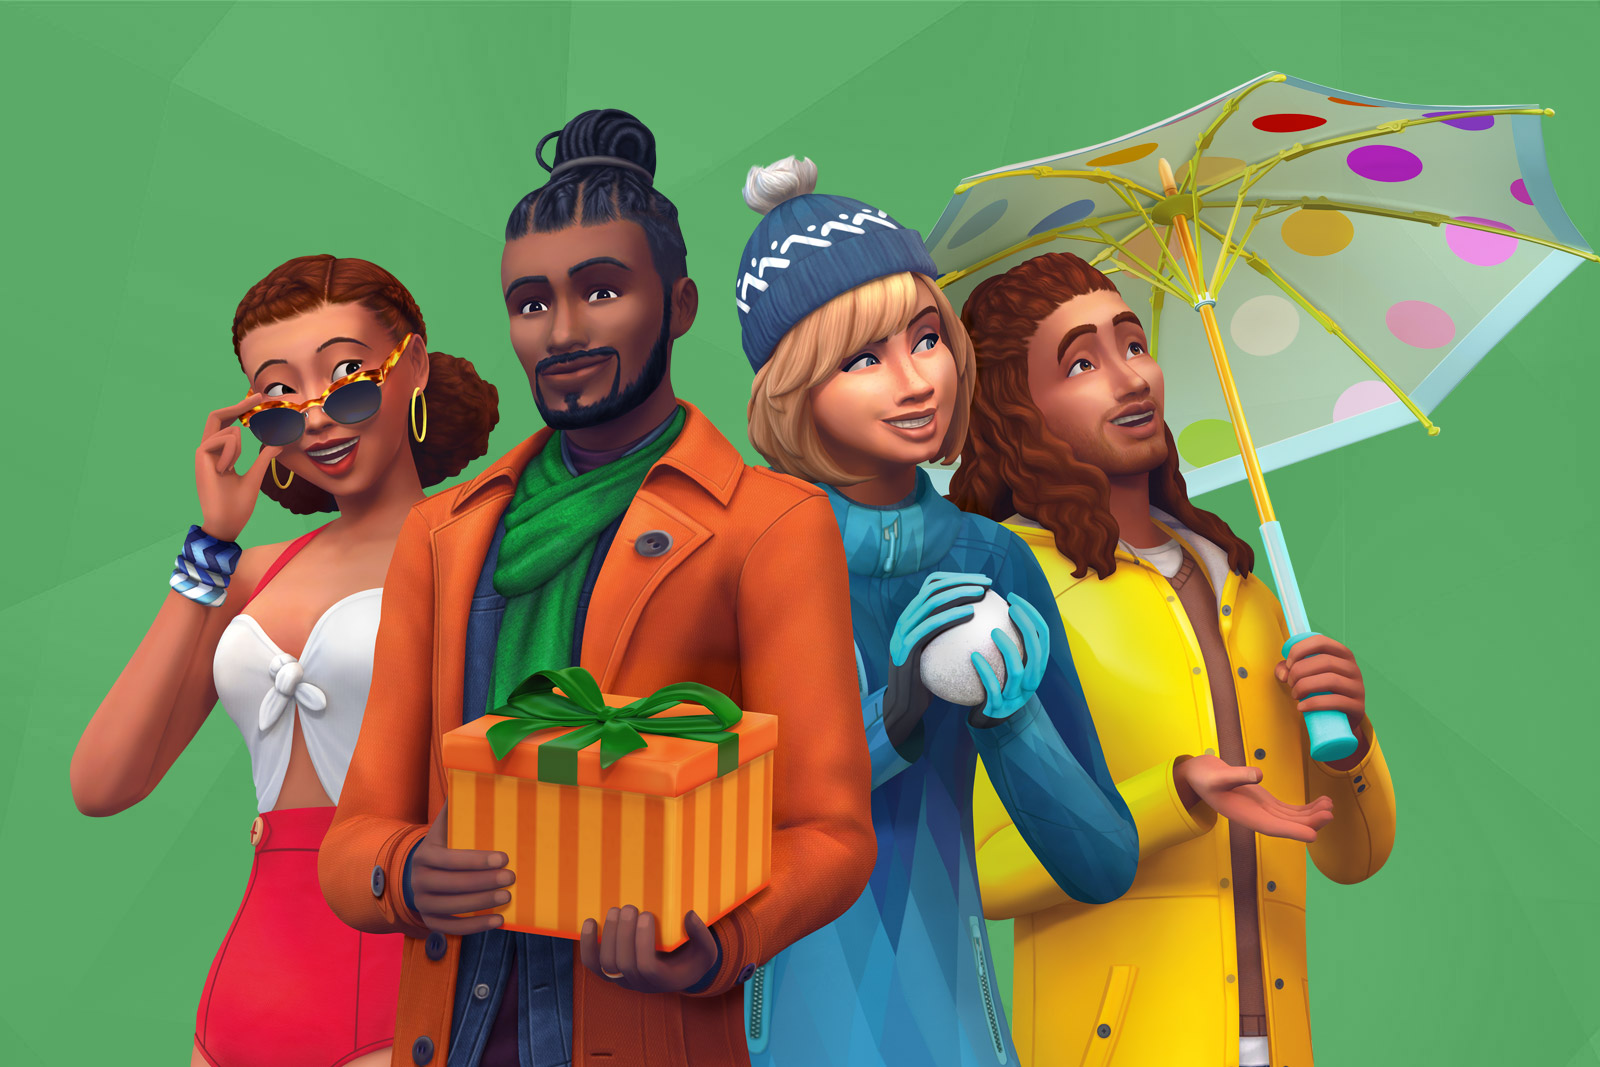 1. Sims 4 Expansion Packs Free Codes Xbox One - wide 6